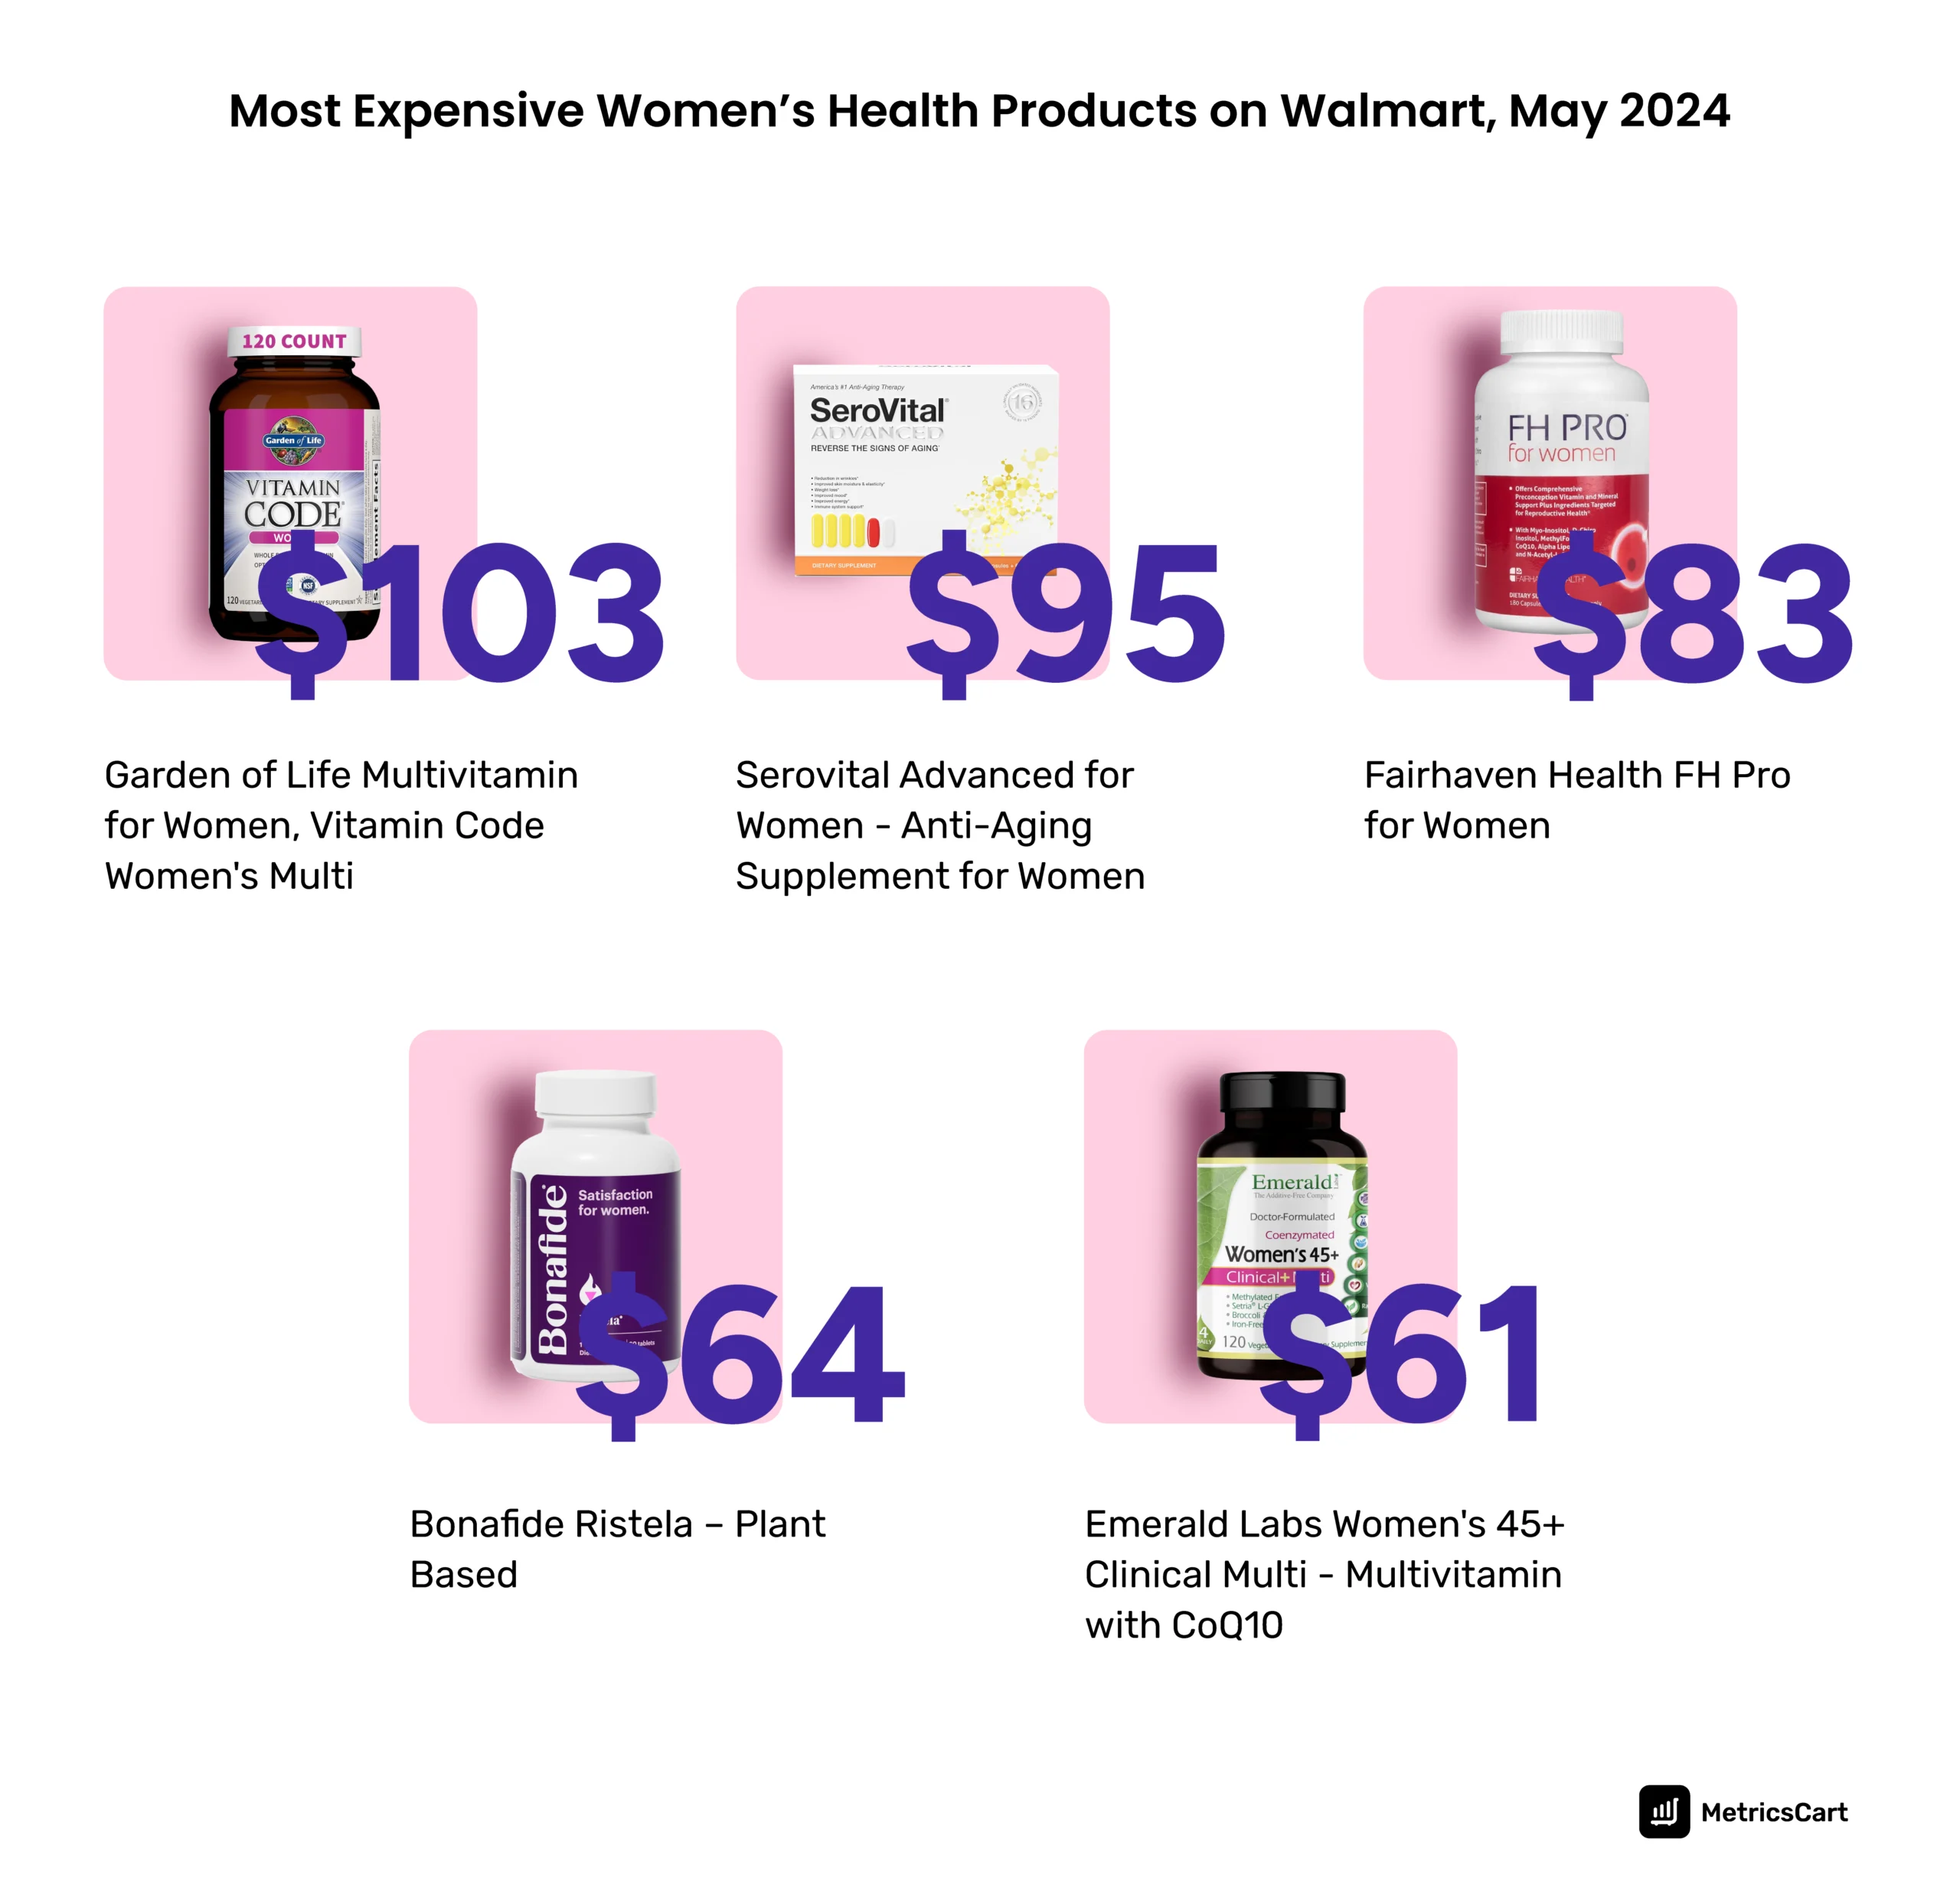 the most expensive products under Walmart's women’s health category in 2024.